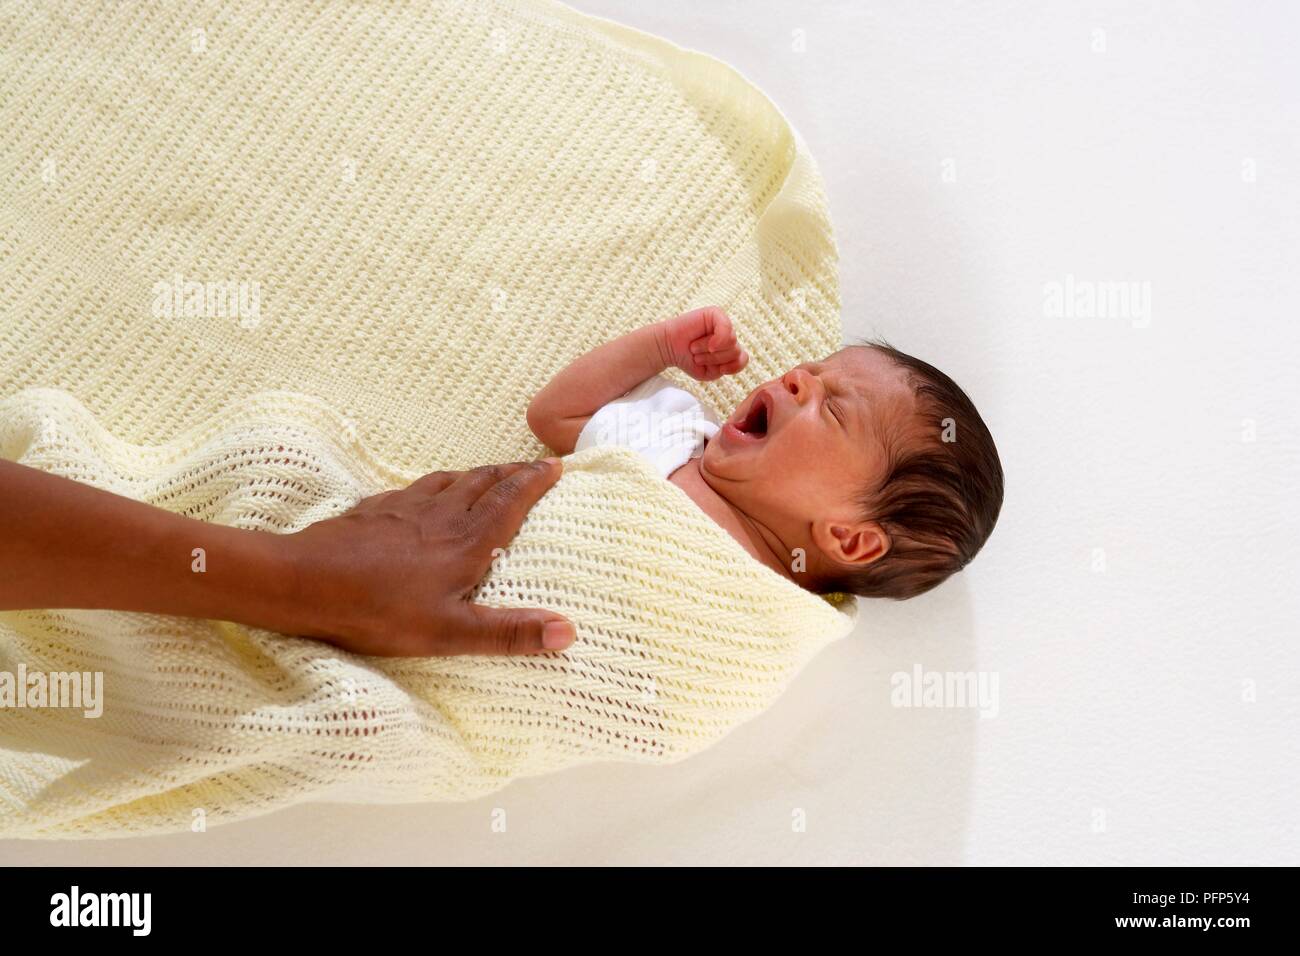 Baby boy being wrapped in baby blanket Stock Photo